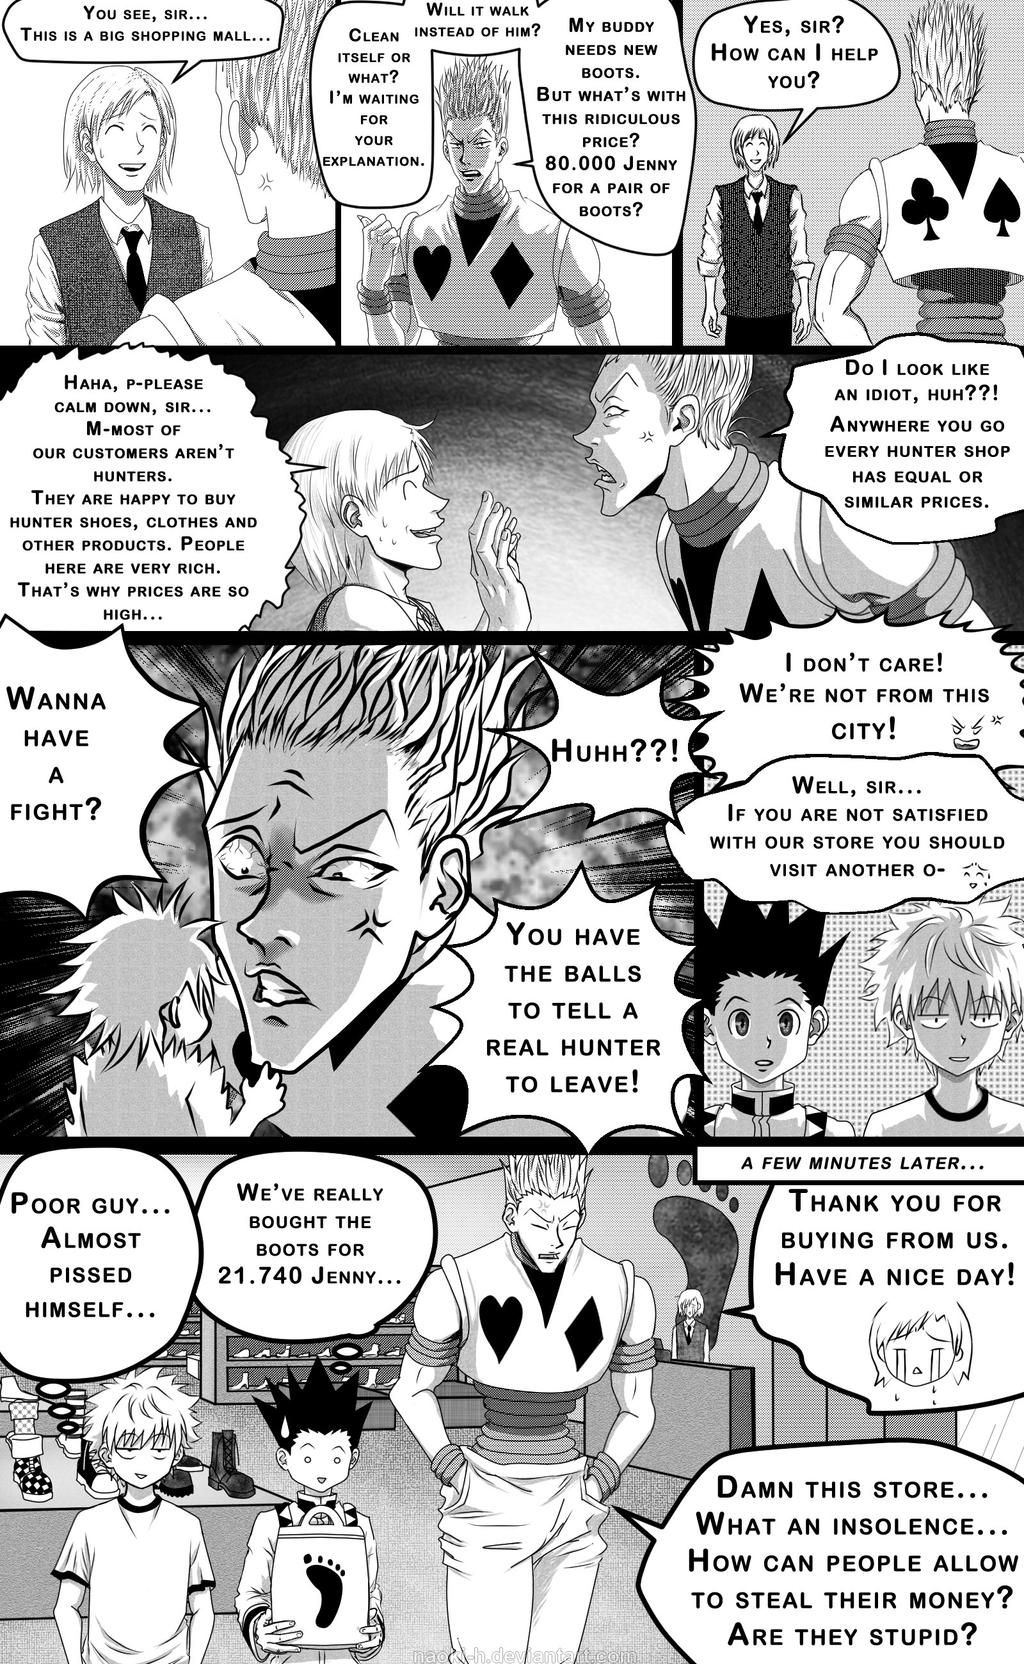 A miracle smile - PAGE 10 by RunStrayWolf on DeviantArt